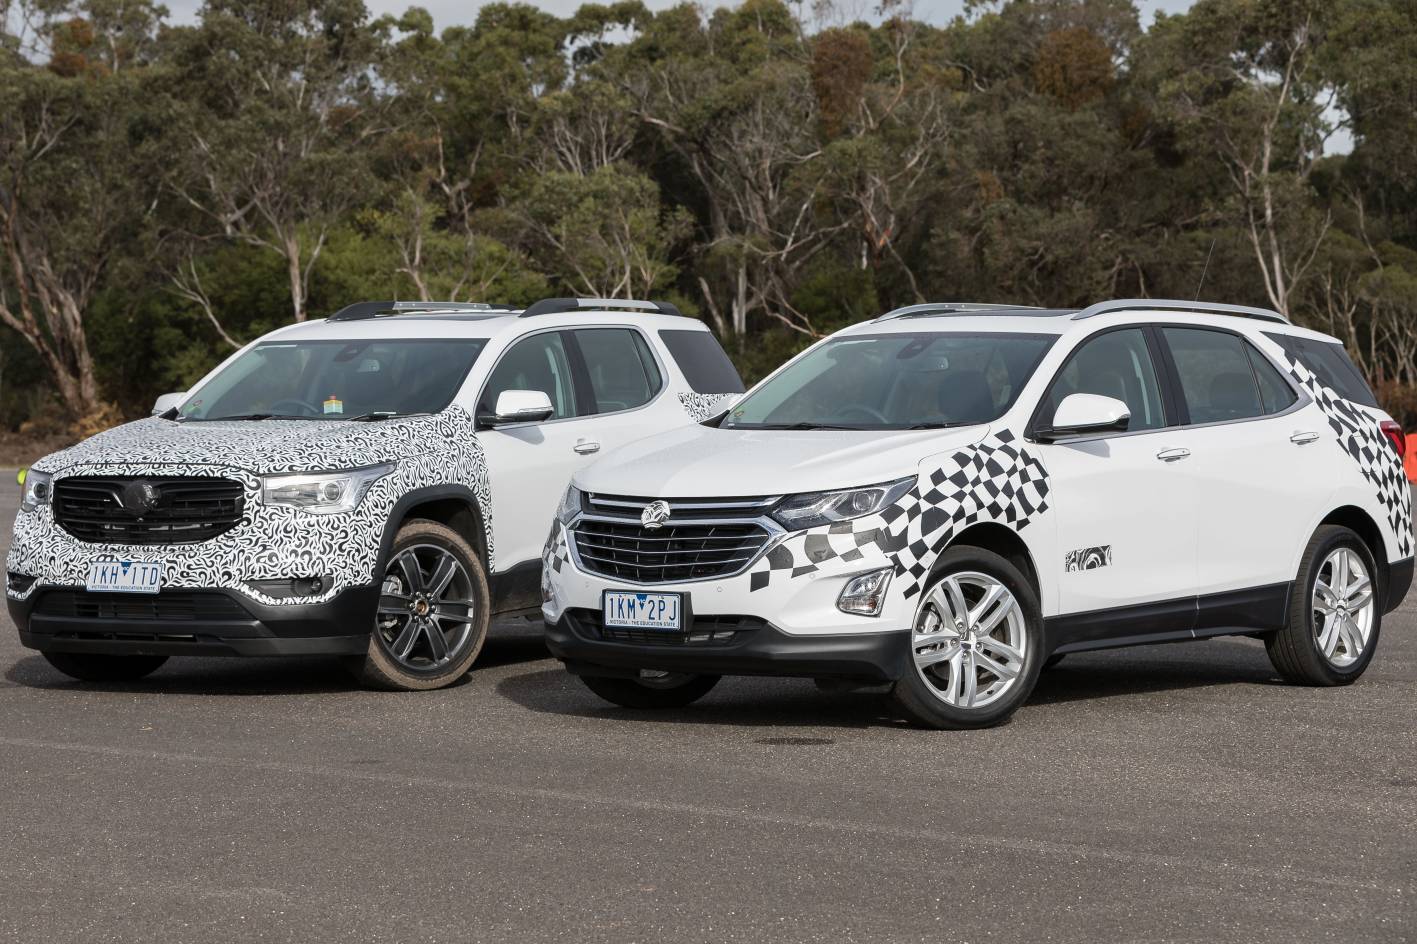 Holden Equinox (Captiva replacement) previewed, 188kW turbo confirmed